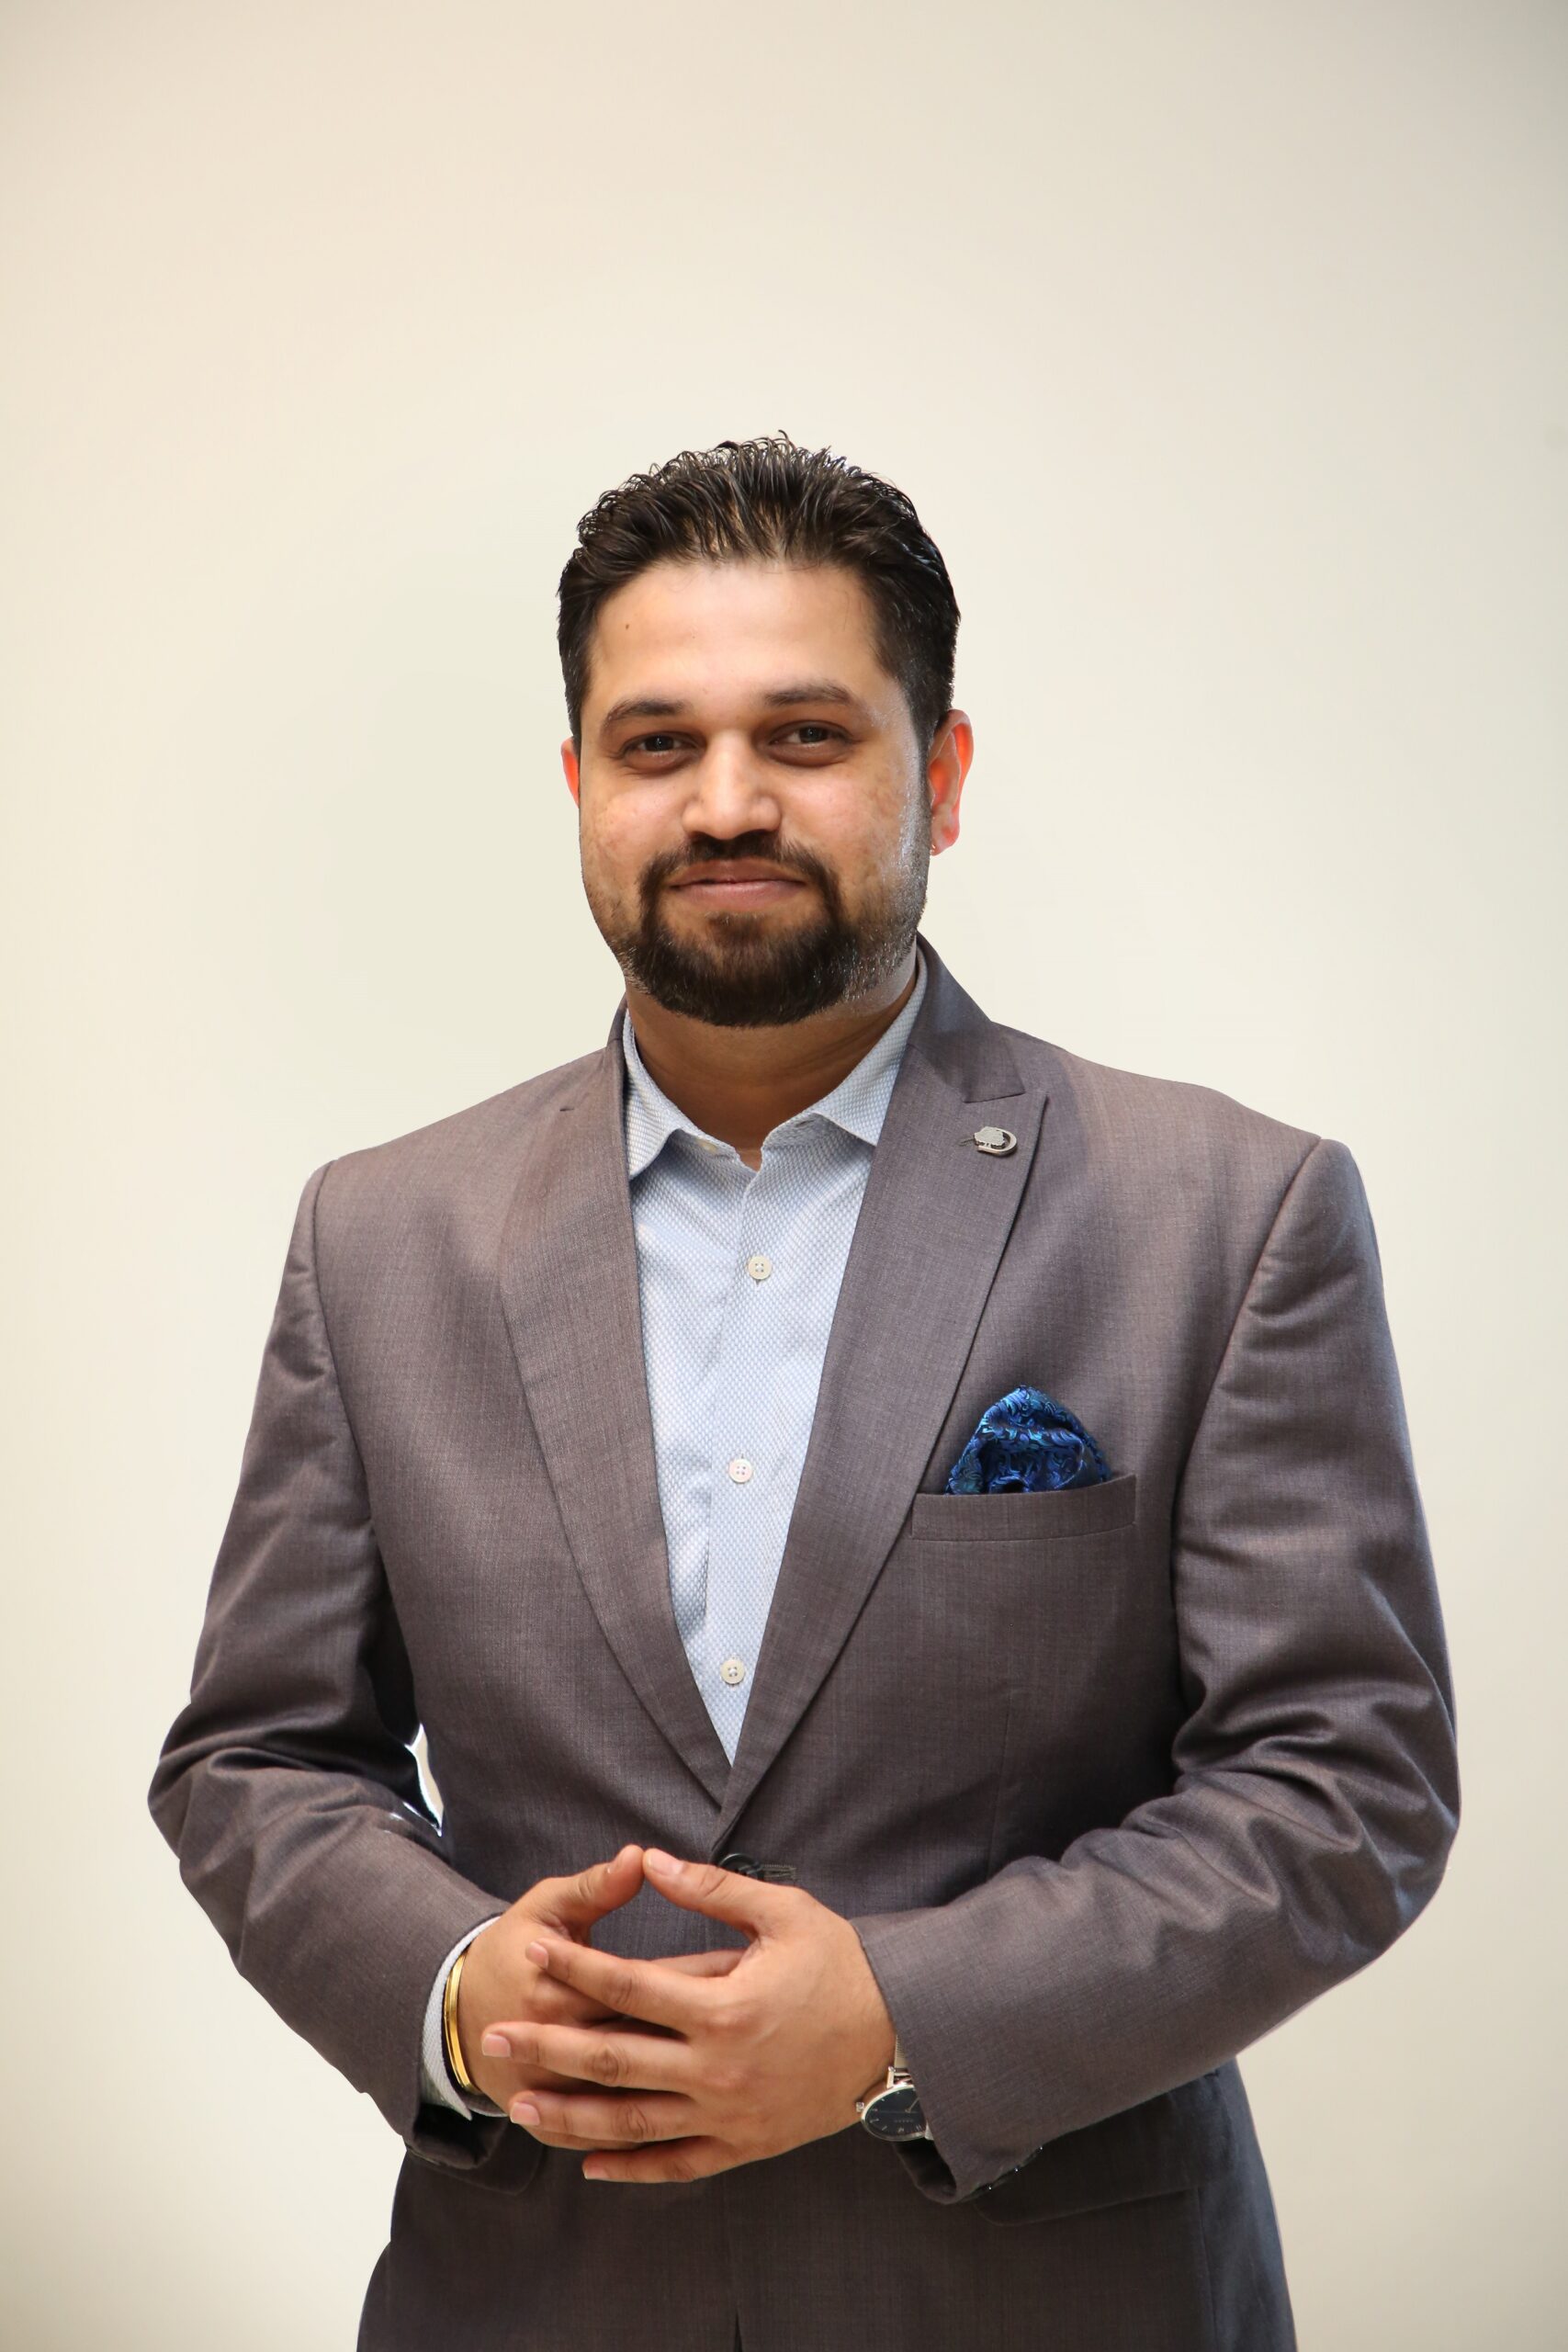 DoubleTree by Hilton Gurugram Baani Square appoints Siddharth Mann as New Commercial Director